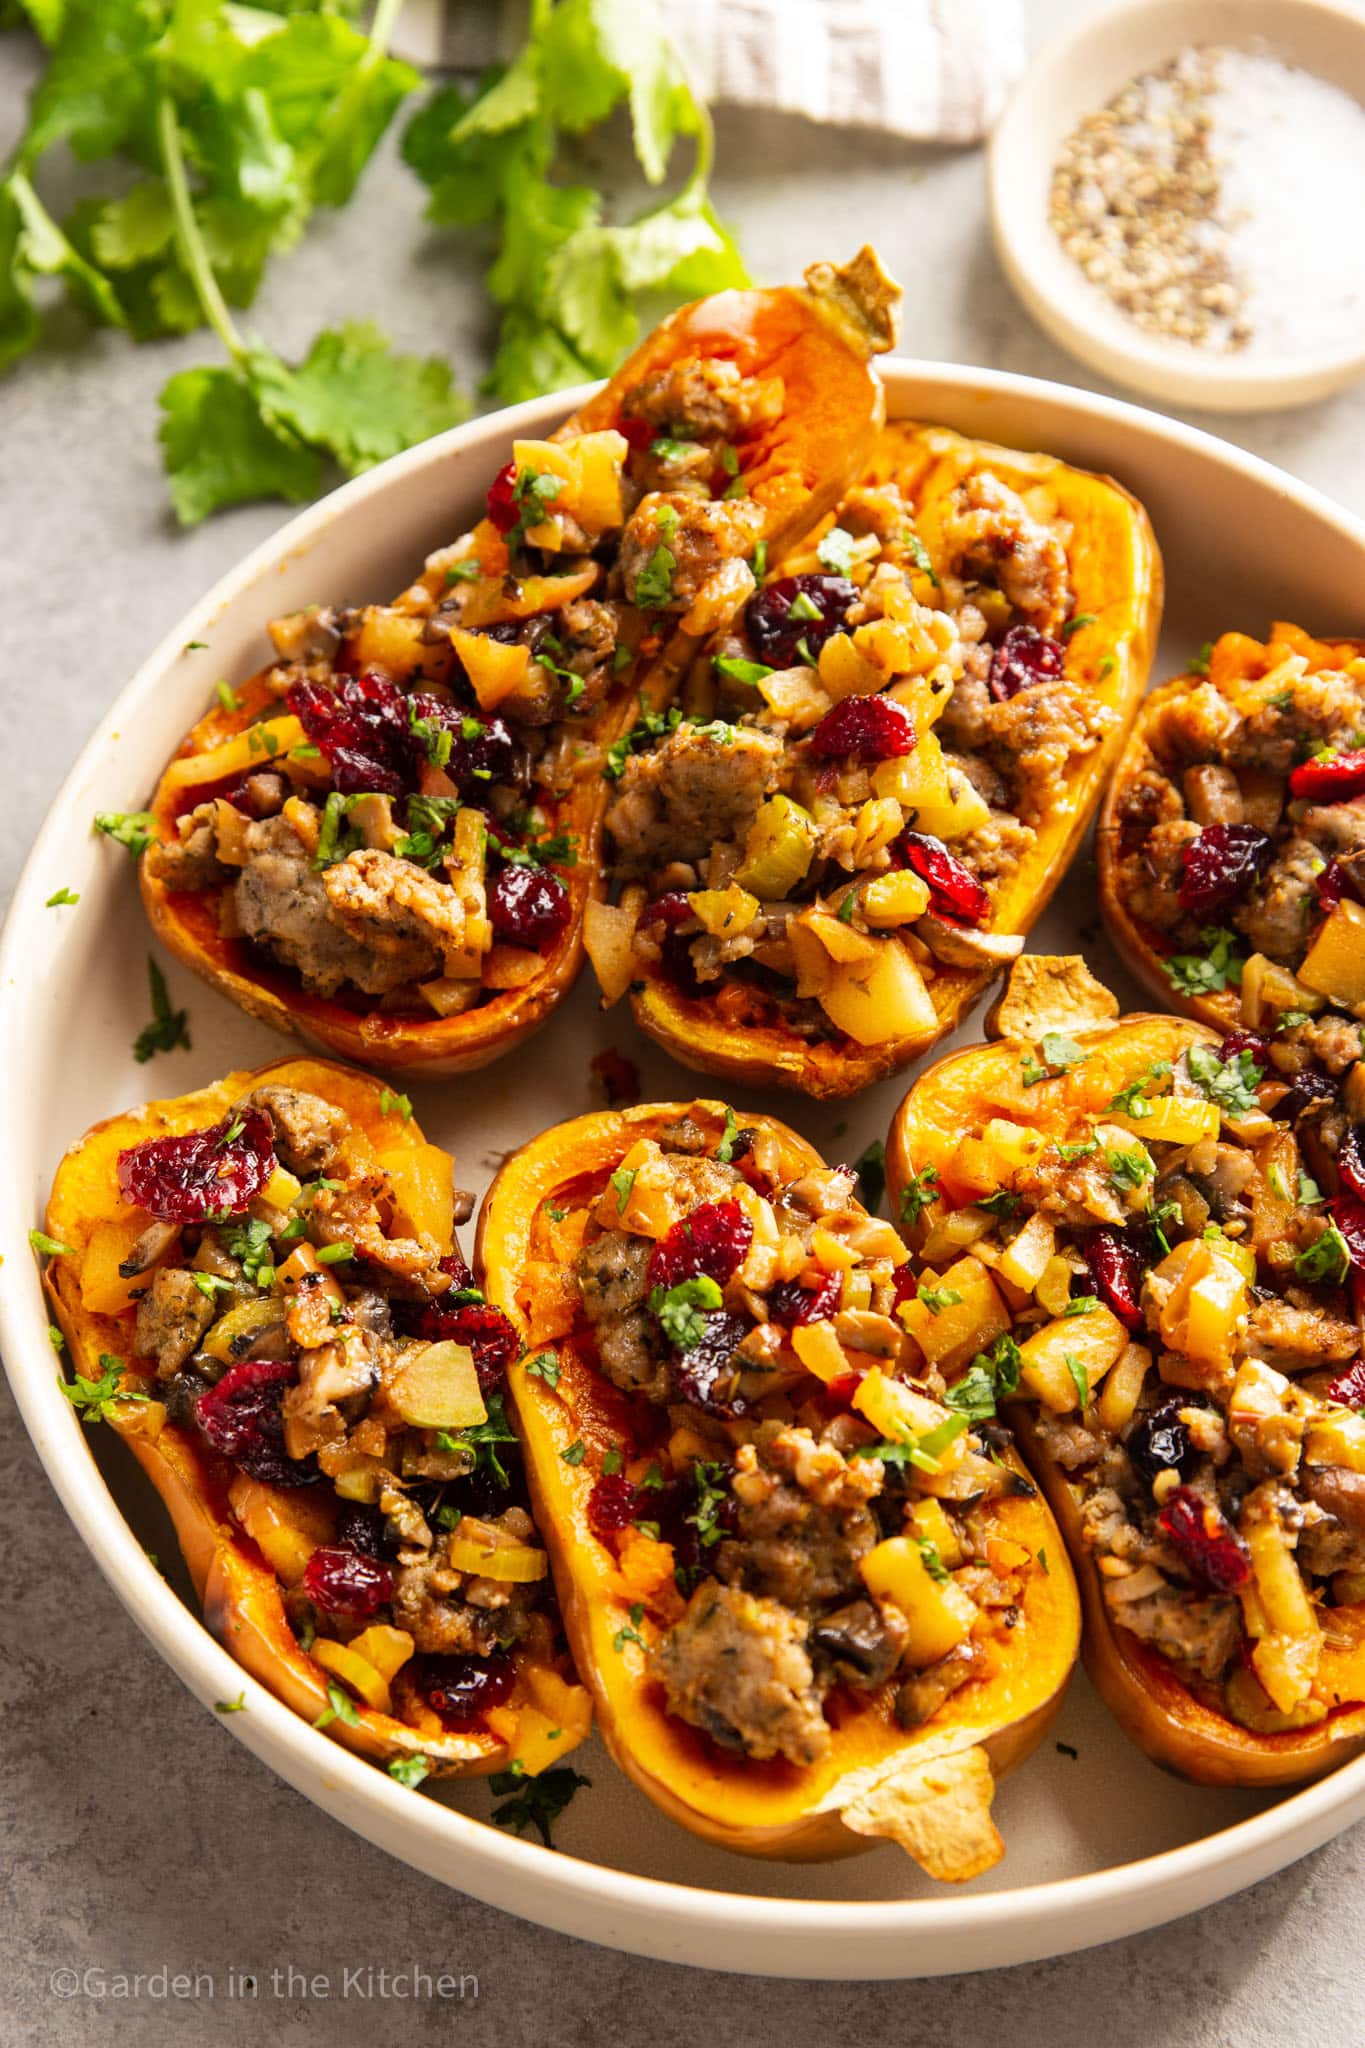 Honey nut squashes stuffed with sausage, apple and cranberry mix.